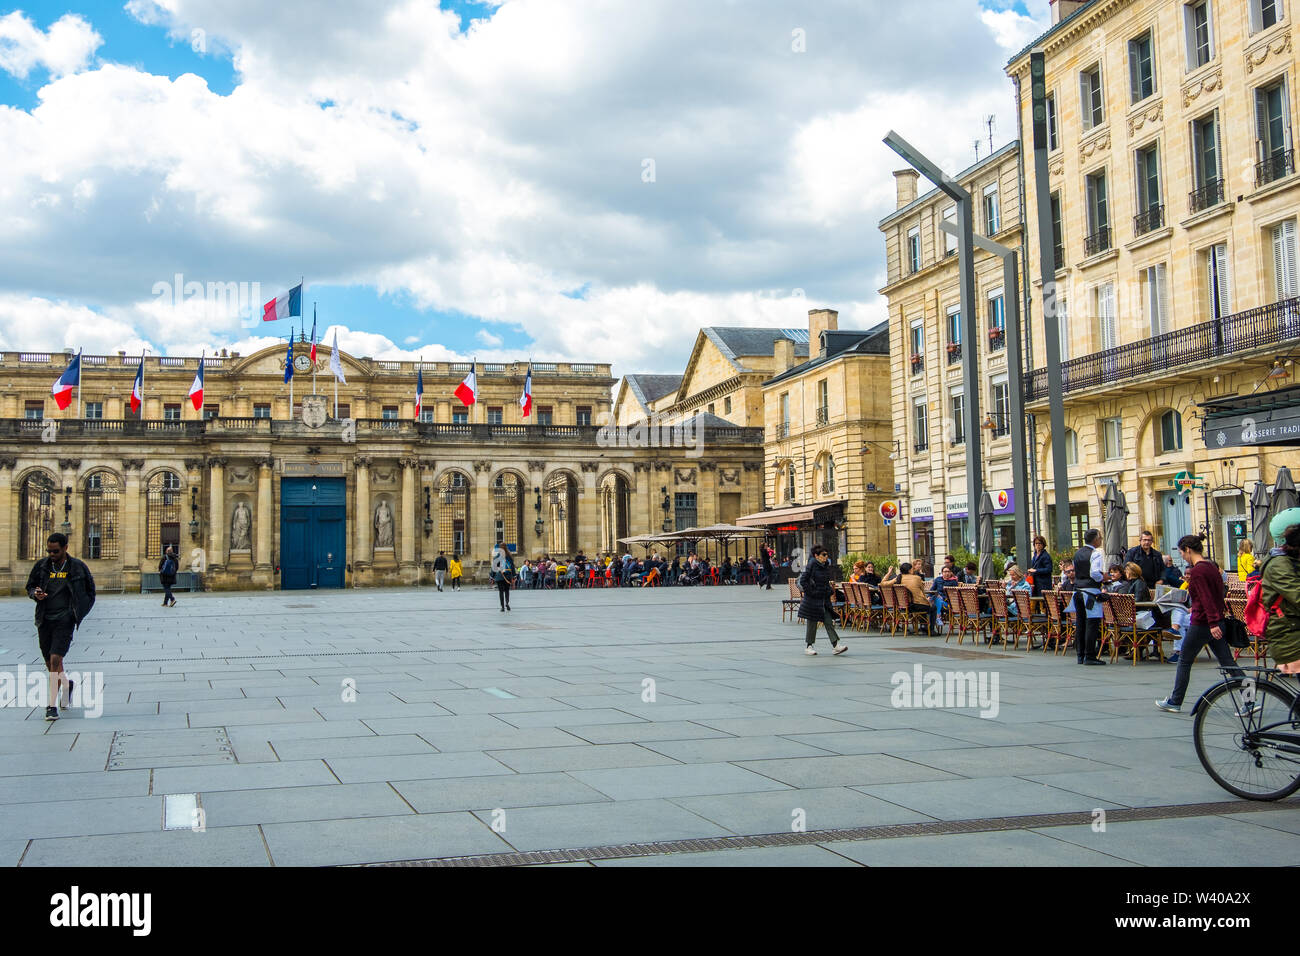 Bordeaux, France - May 5, 2019 : A Place Pey Berland in front of the City Hall with street cafes where people relax. Bordeaux, Aquitaine, France Stock Photo